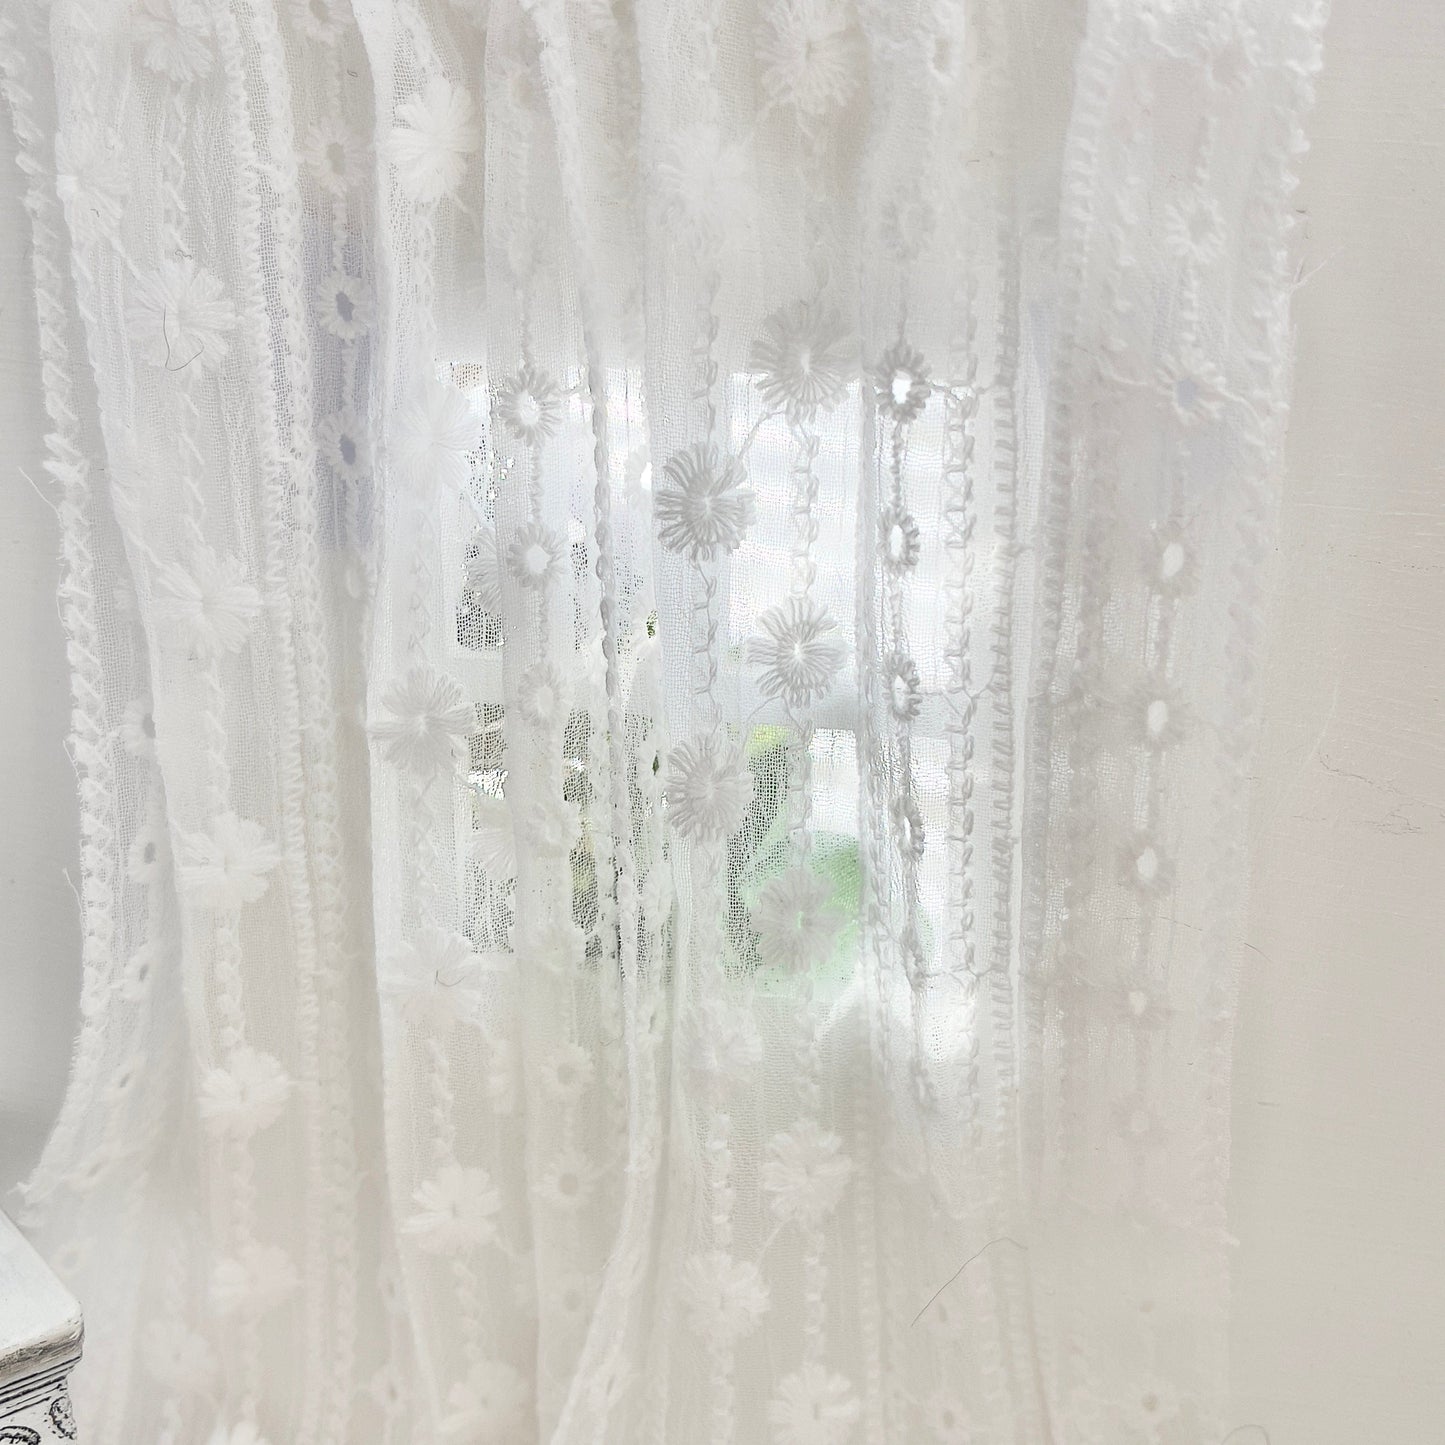 Chantallena Doll House Dollhouse Accessories CURTAINS- White Lace Embroidered 2 Panel Cotton Curtains | White Embroidered Lace | Soft Furnishings